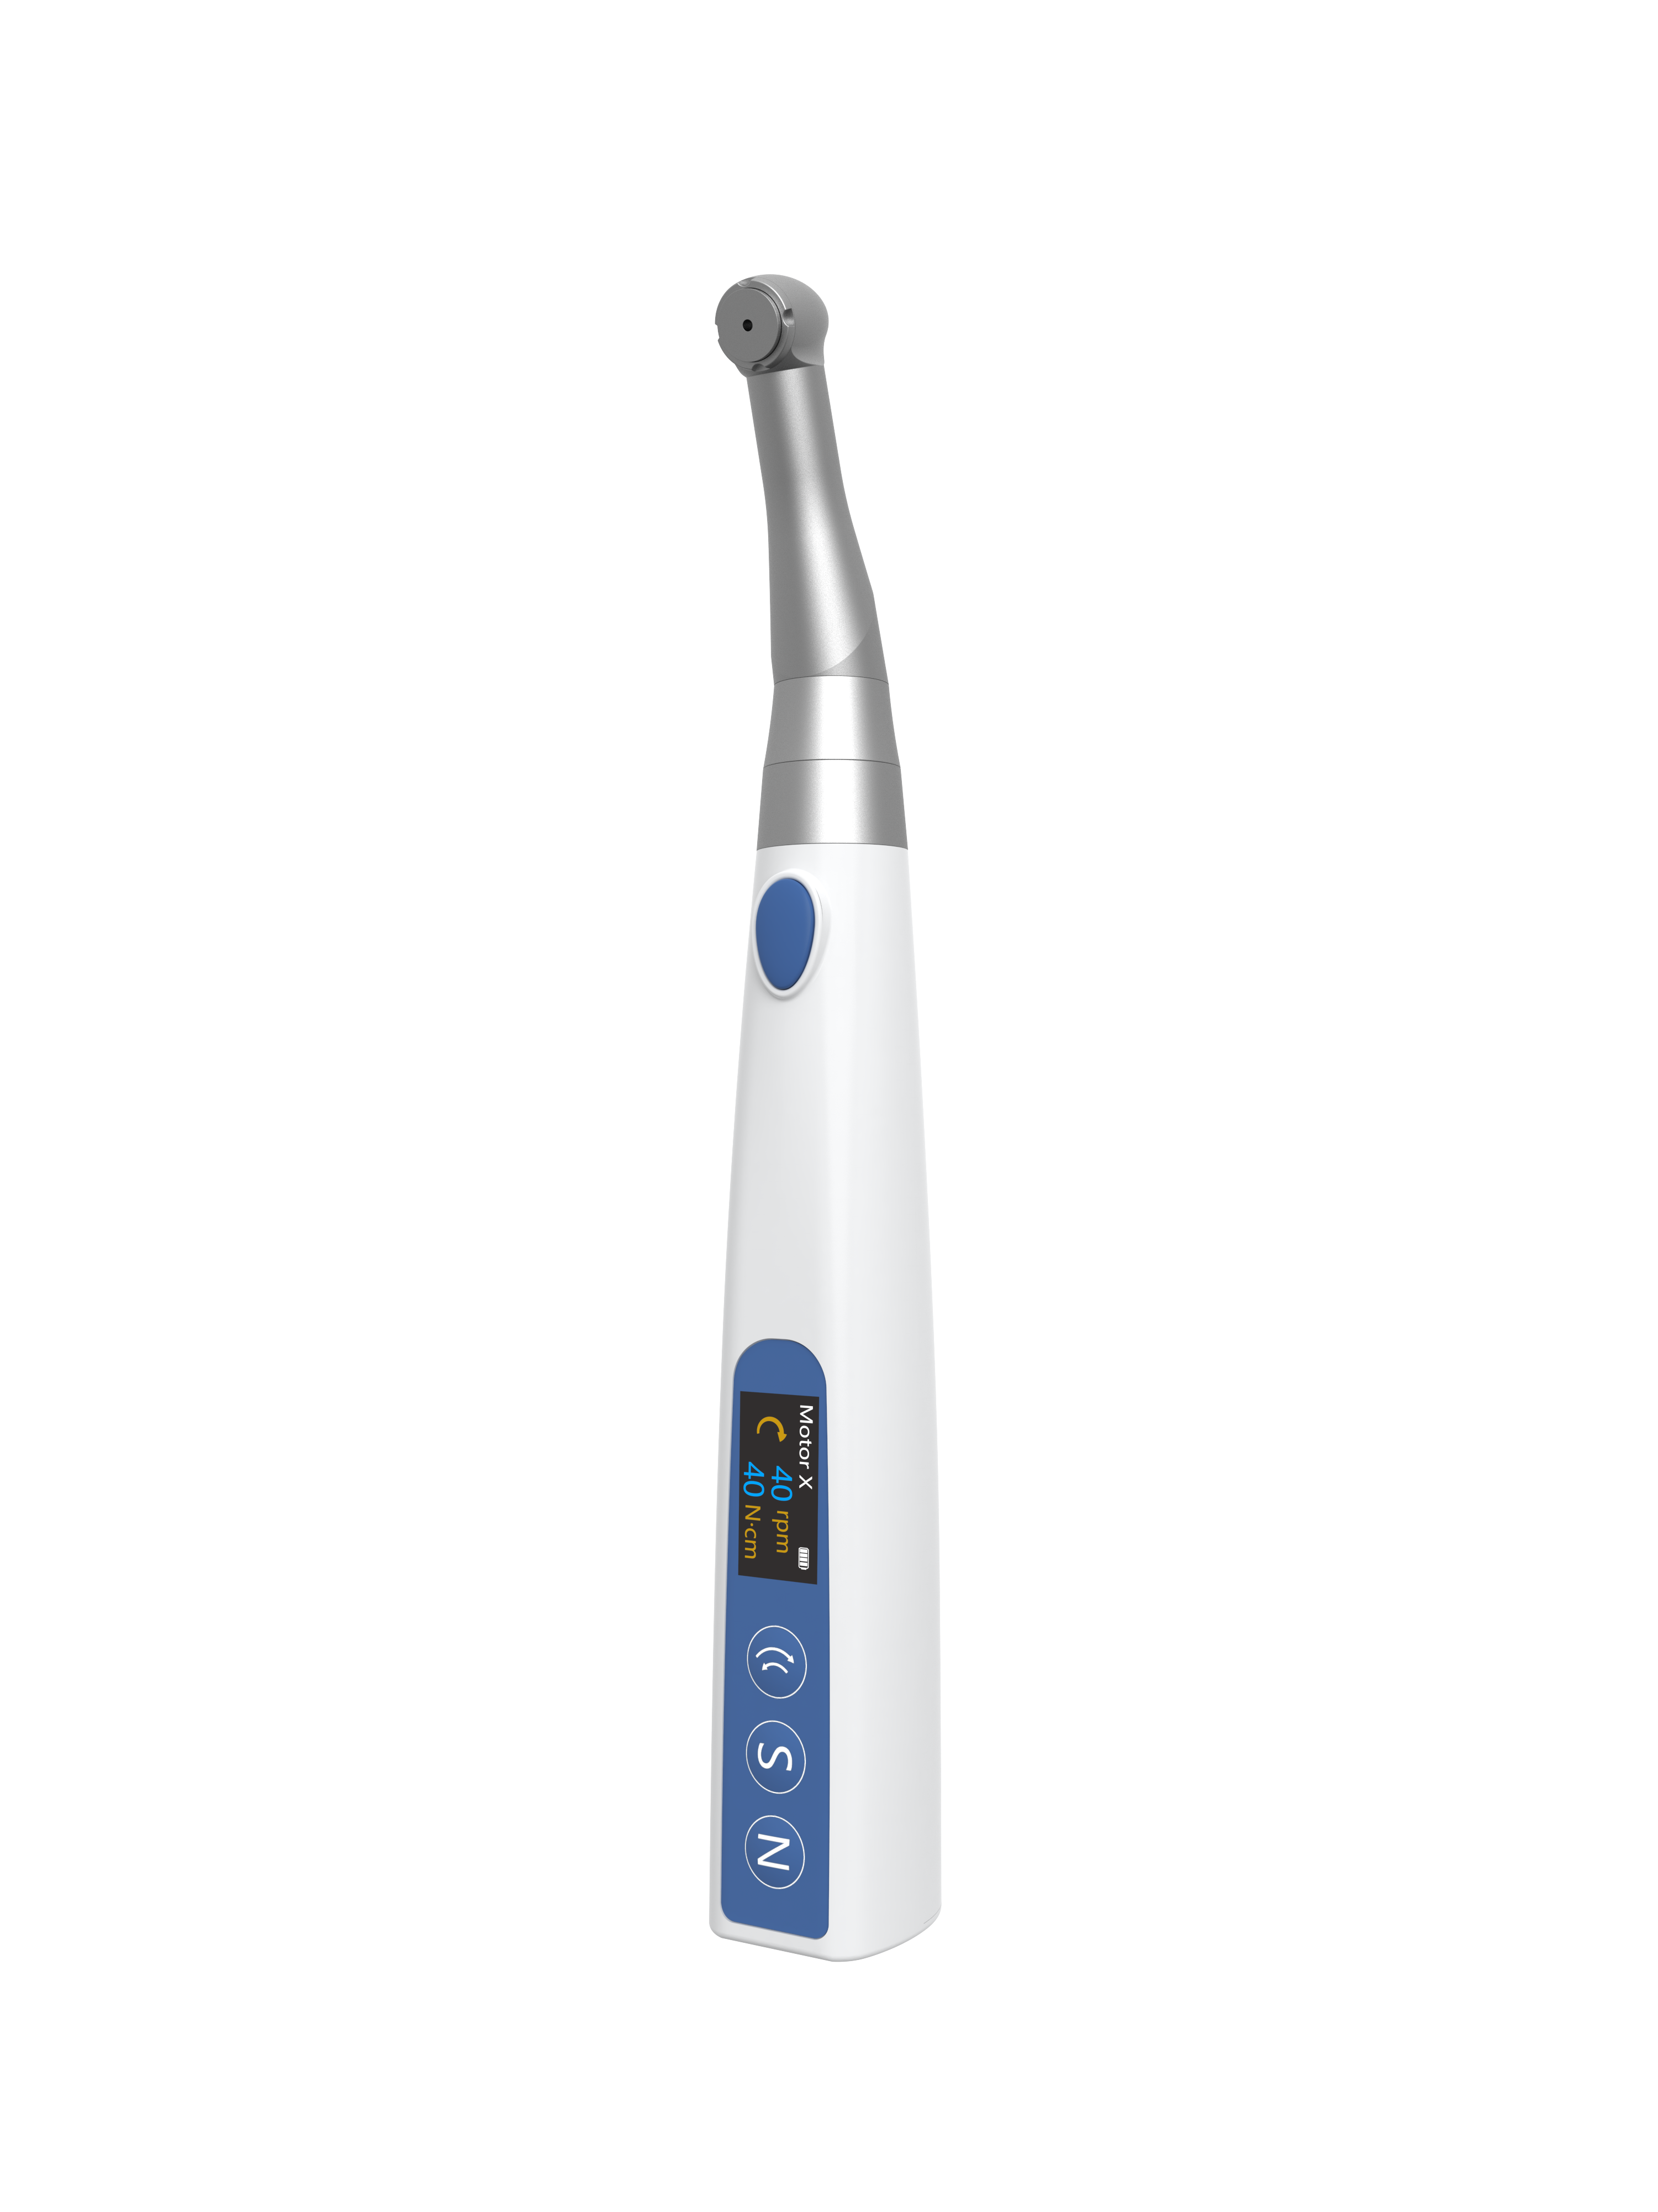 Jerry medical electric dental implant torque wrench